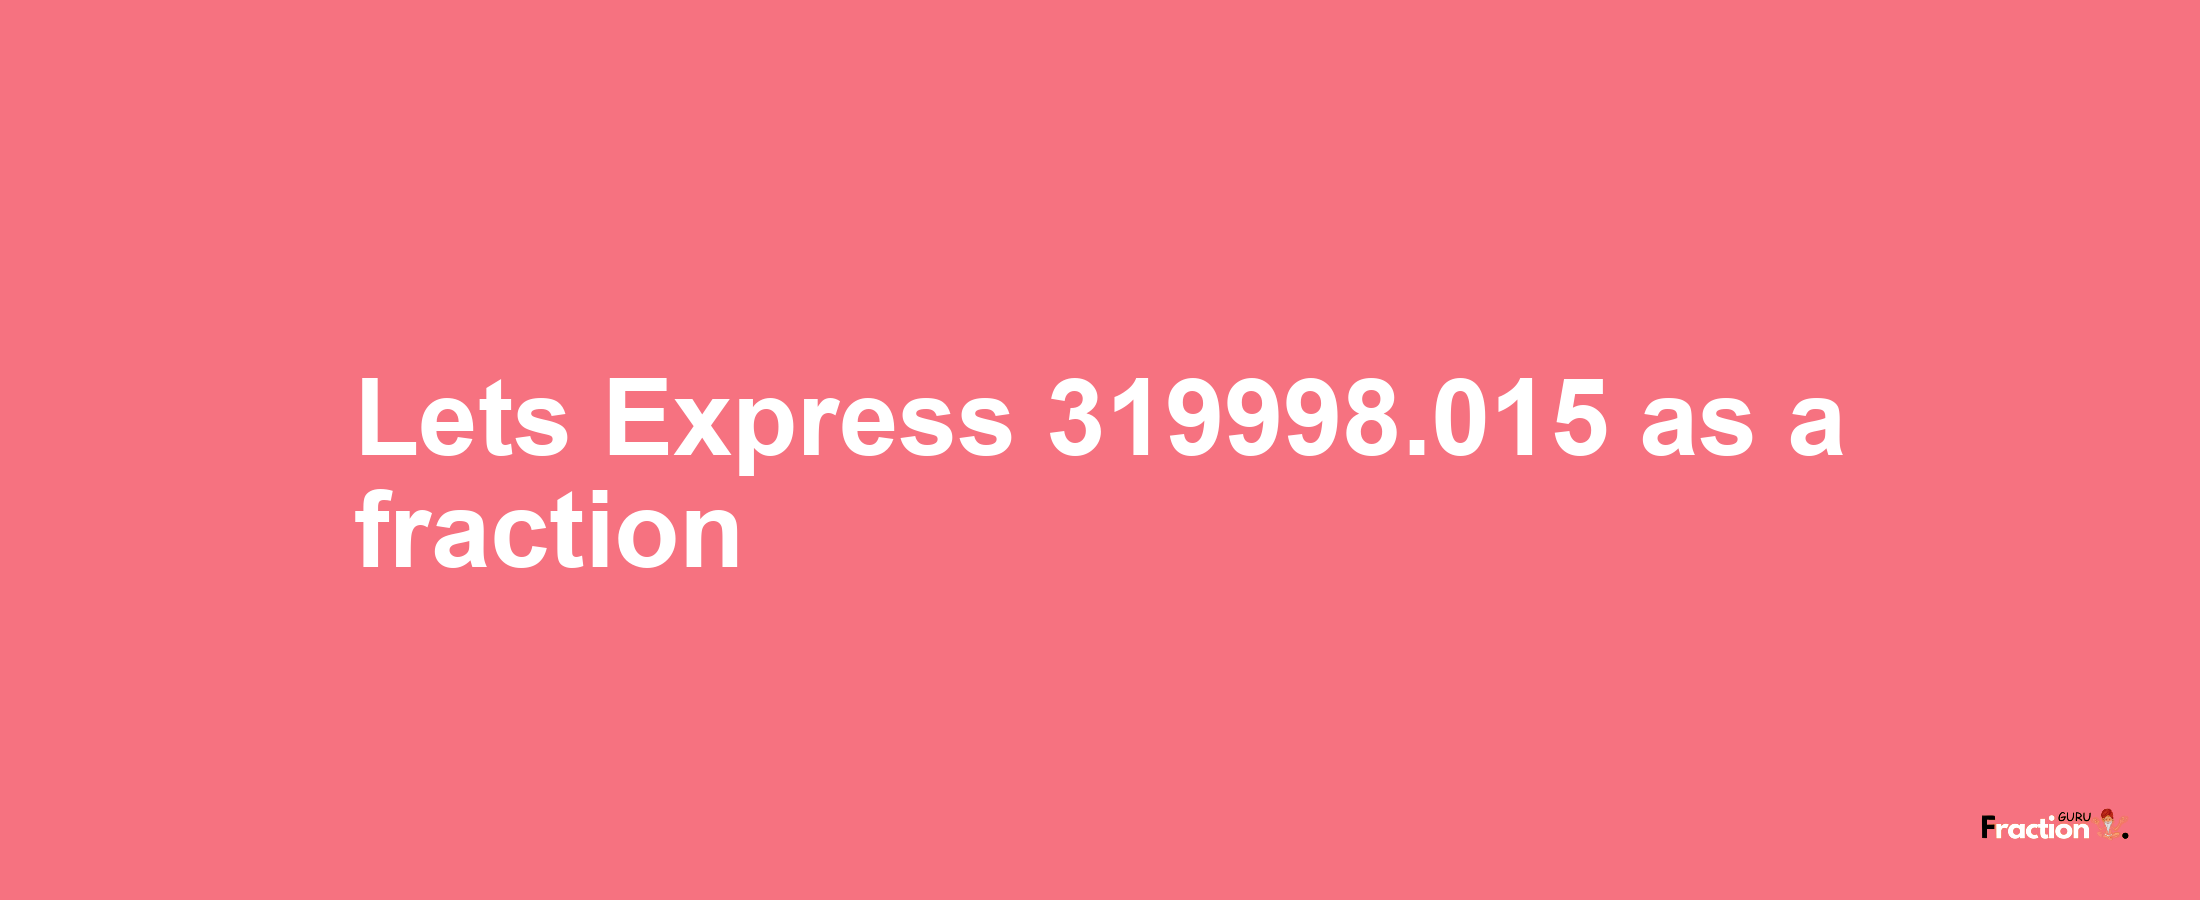 Lets Express 319998.015 as afraction